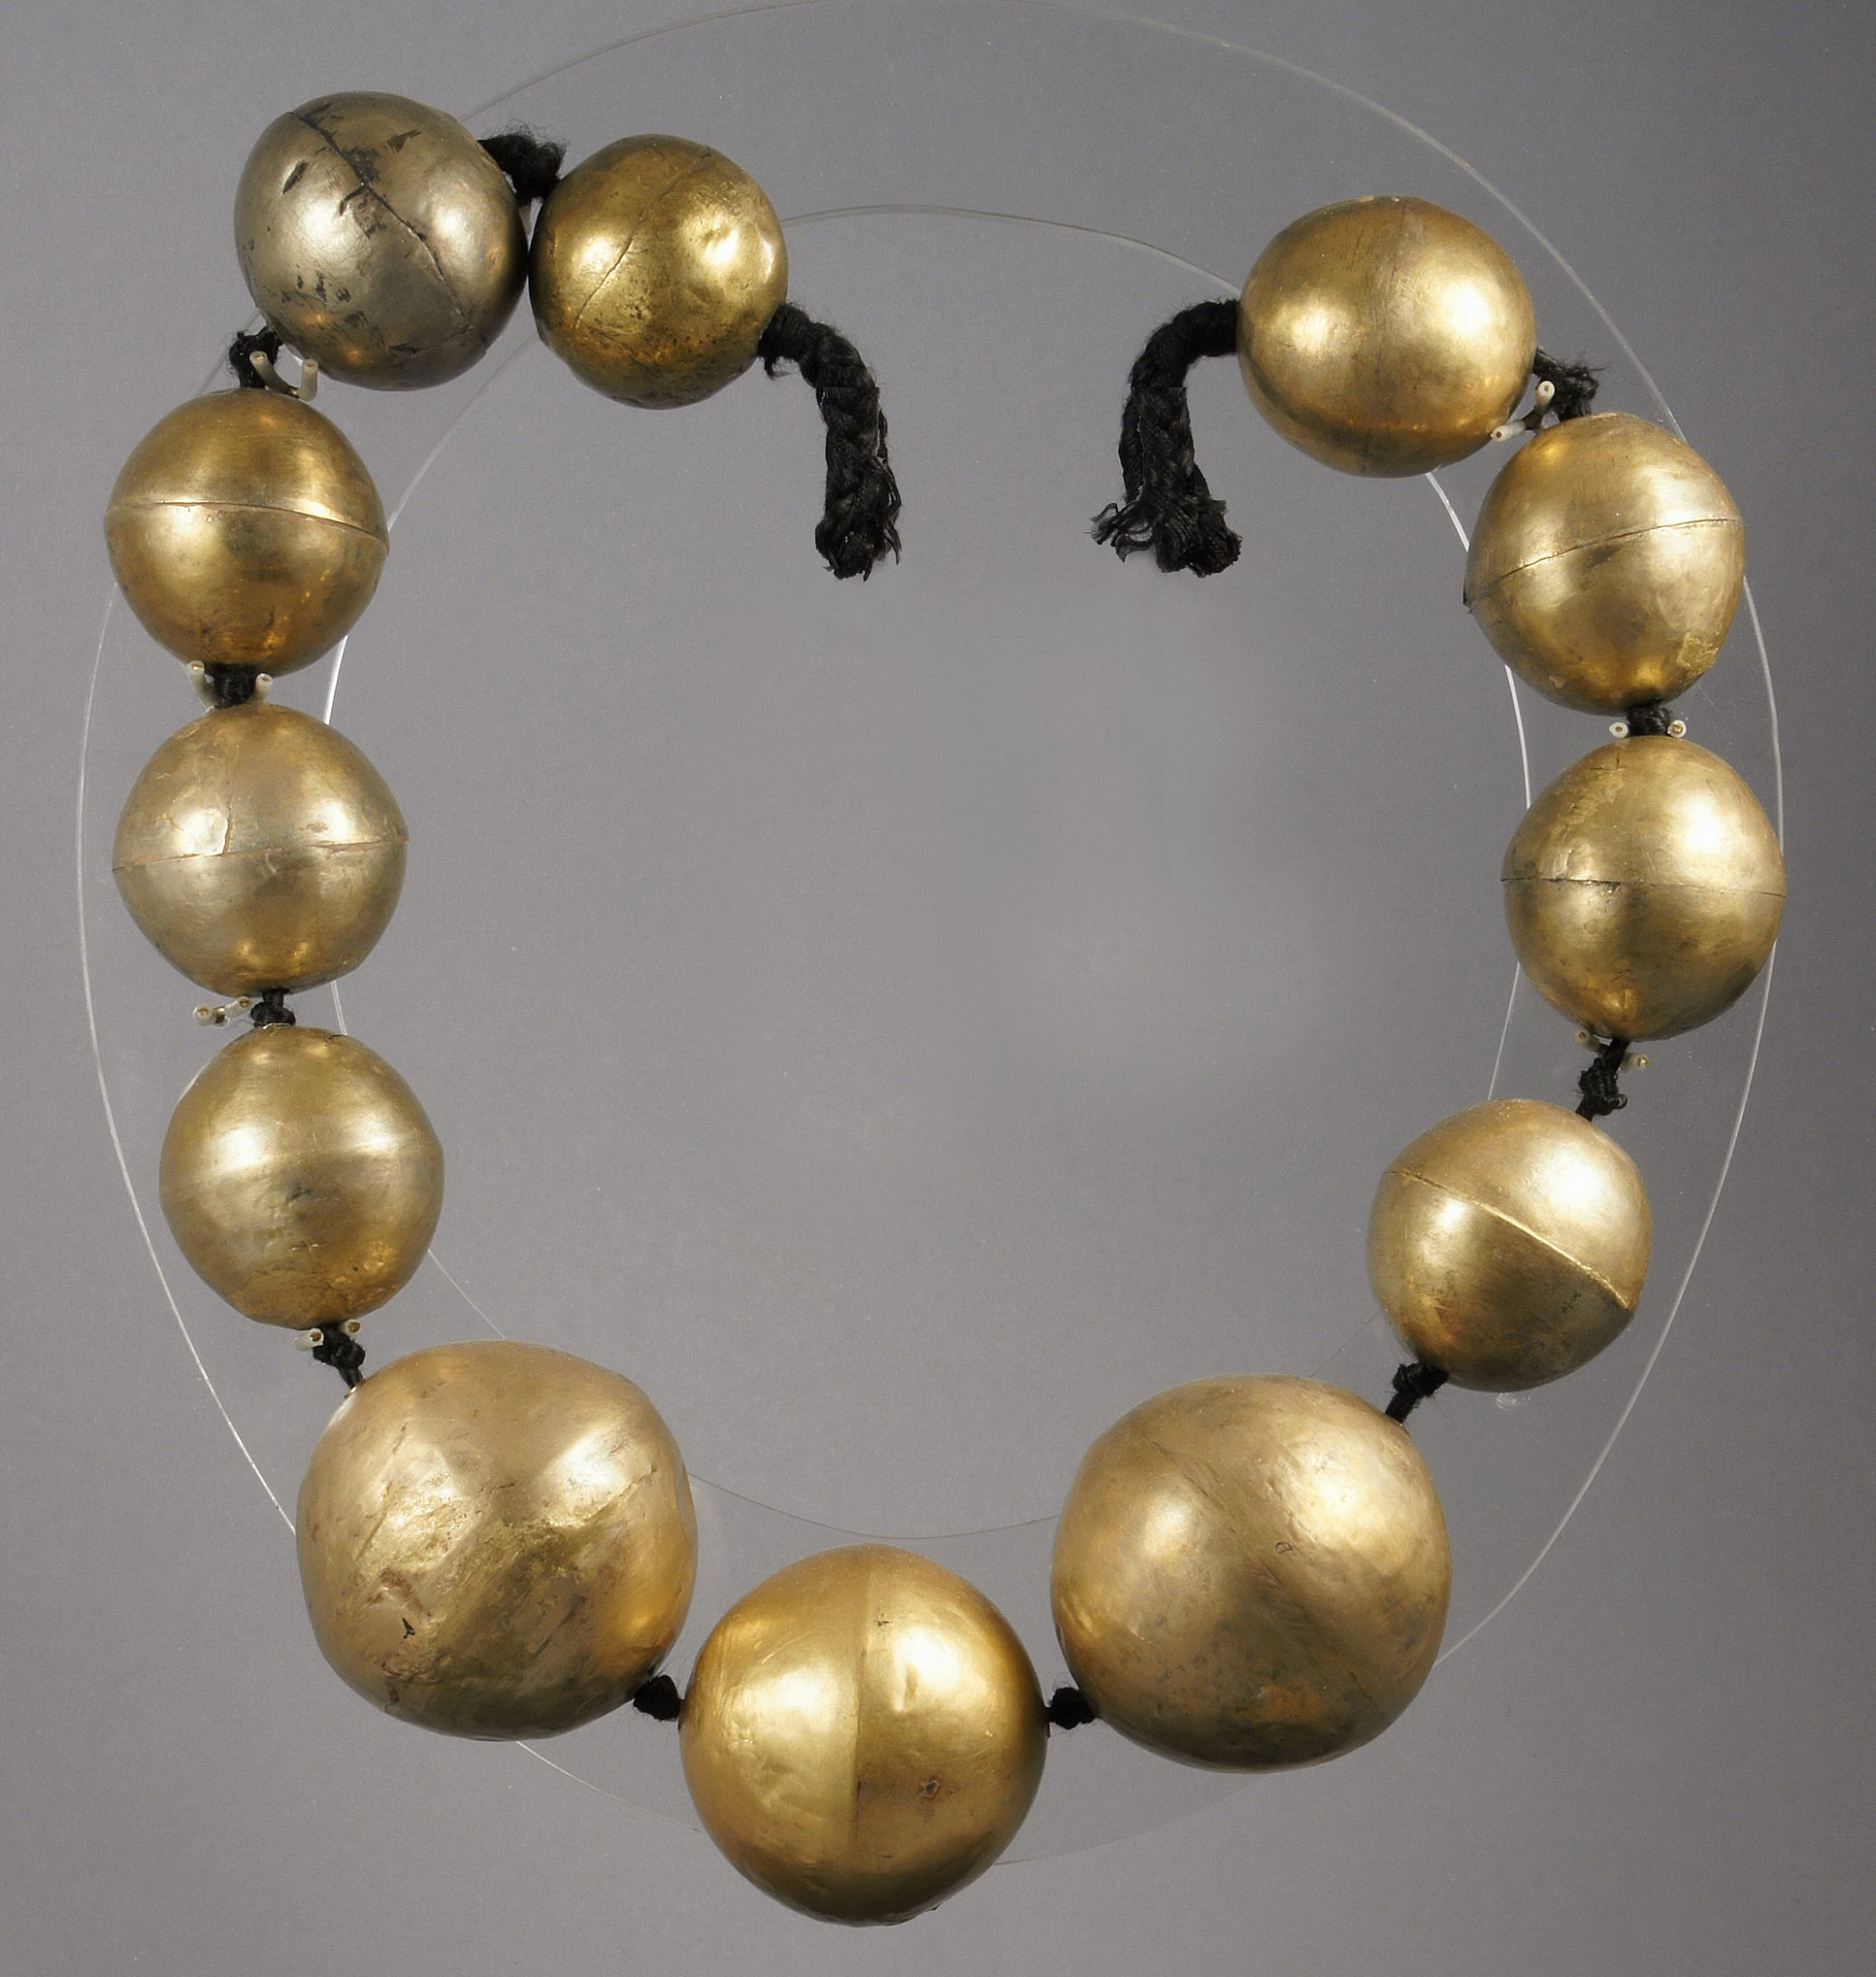 Peru, Chimú Gold 29" Necklace of Large Hollow Beads
The Chimú inherited a taste for hollow gold bead necklaces from their Moche predecessors. In both cultures, each bead was cast and hammered in two halves that were then joined together by soldering. In the Chimú technique, the edges of the two halves were nested together.  These beads are extremely light with a greater percentage of silver than gold.  They used depletion gilding to bring the gold to the surface by using of heats and salts.    This allowed the Chimu to make the gold available for a large and growing ruling class. Private Florida collection prior to 1980.
Media: Metal
Dimensions: Necklace Length: 29"; largest bead 2 1/4" diameter - smallest 1 1/2"
$27,000
M7991